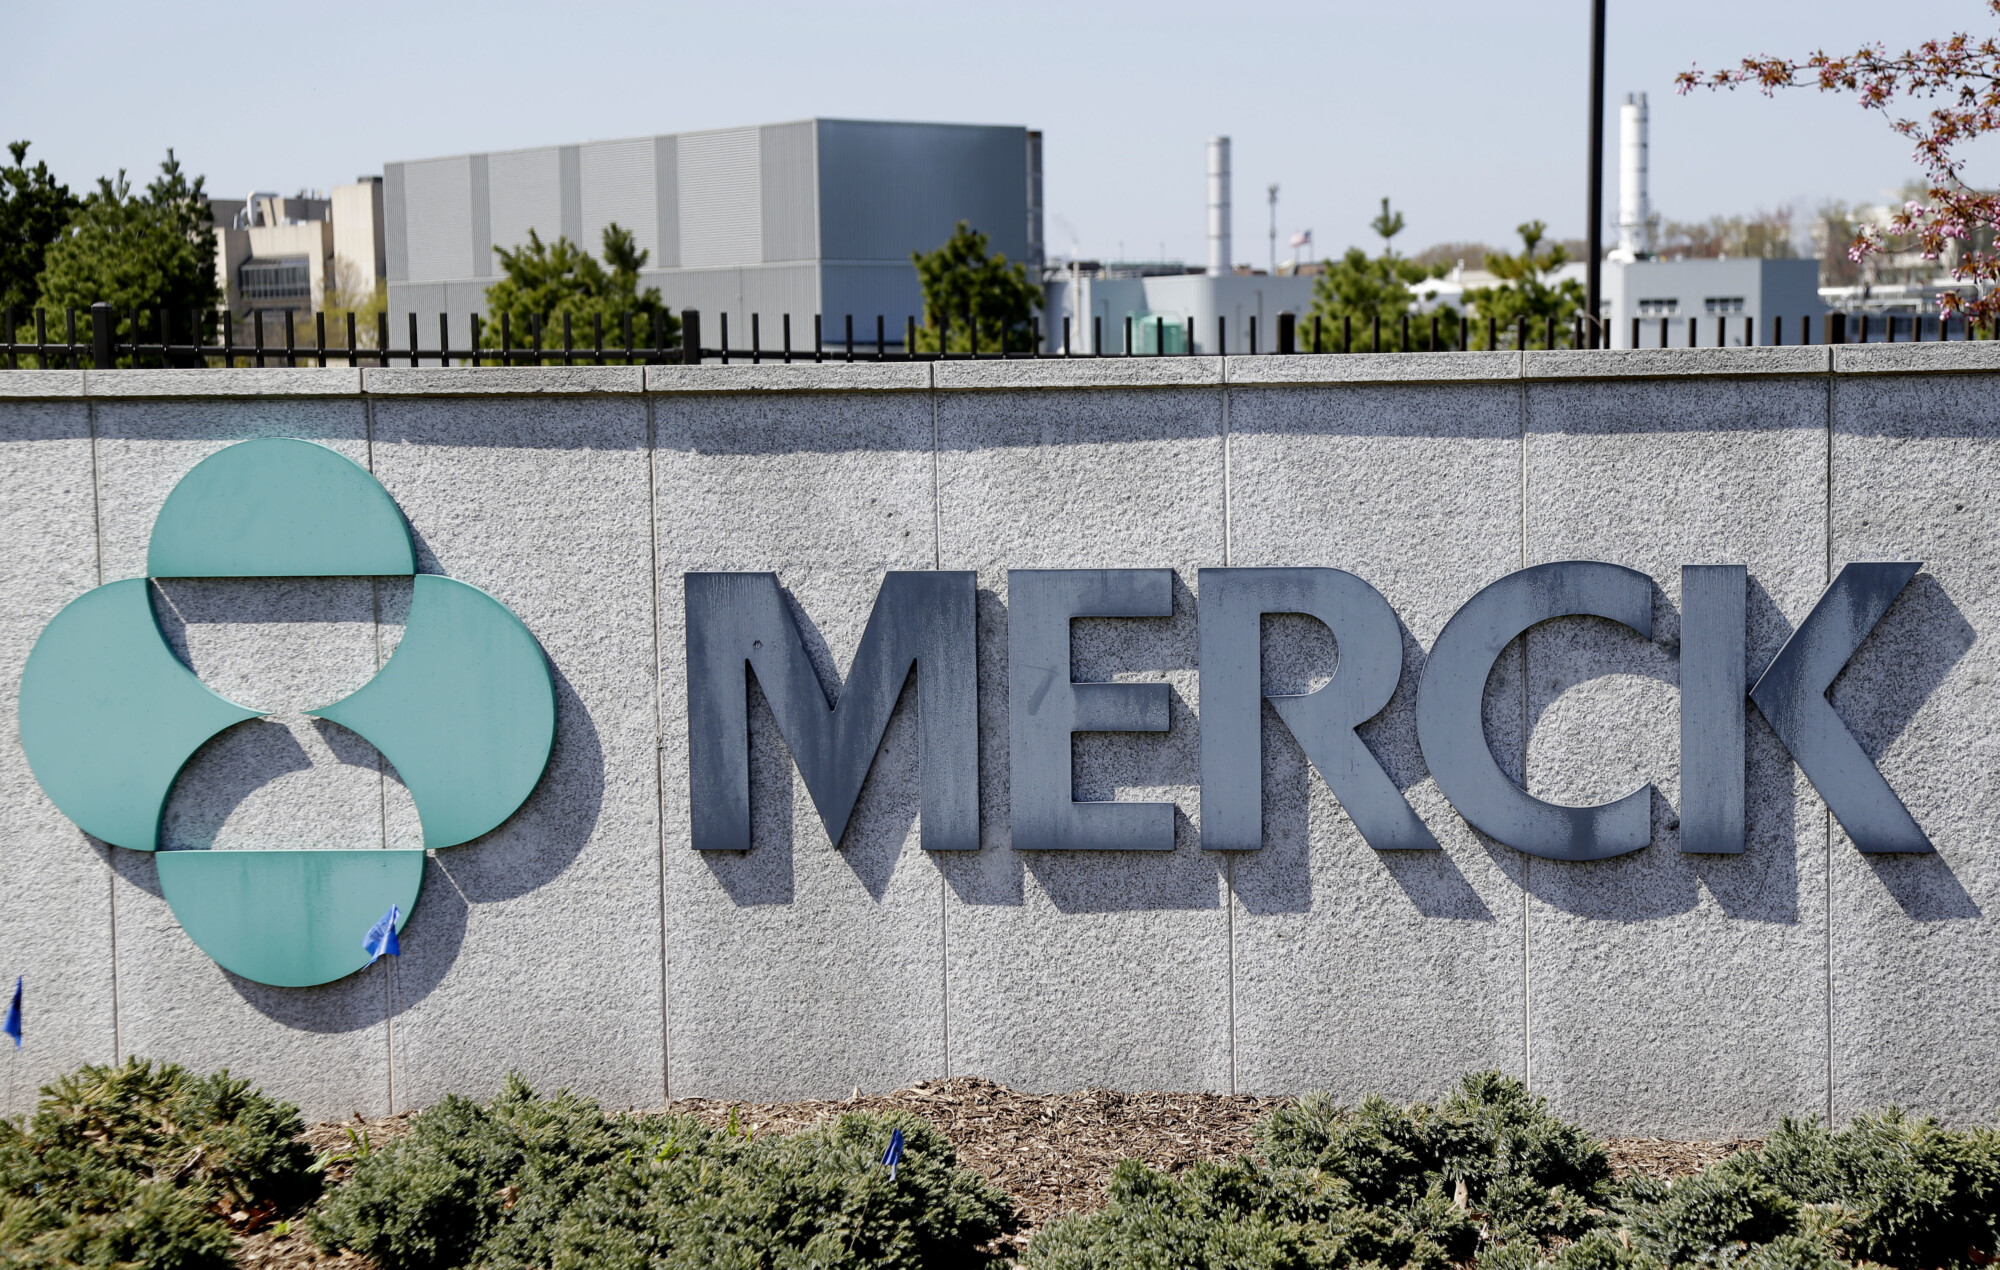 Shareholder Demands ‘Communist China Audit’ of Merck Amid Likely Risks From Geopolitical Fallout